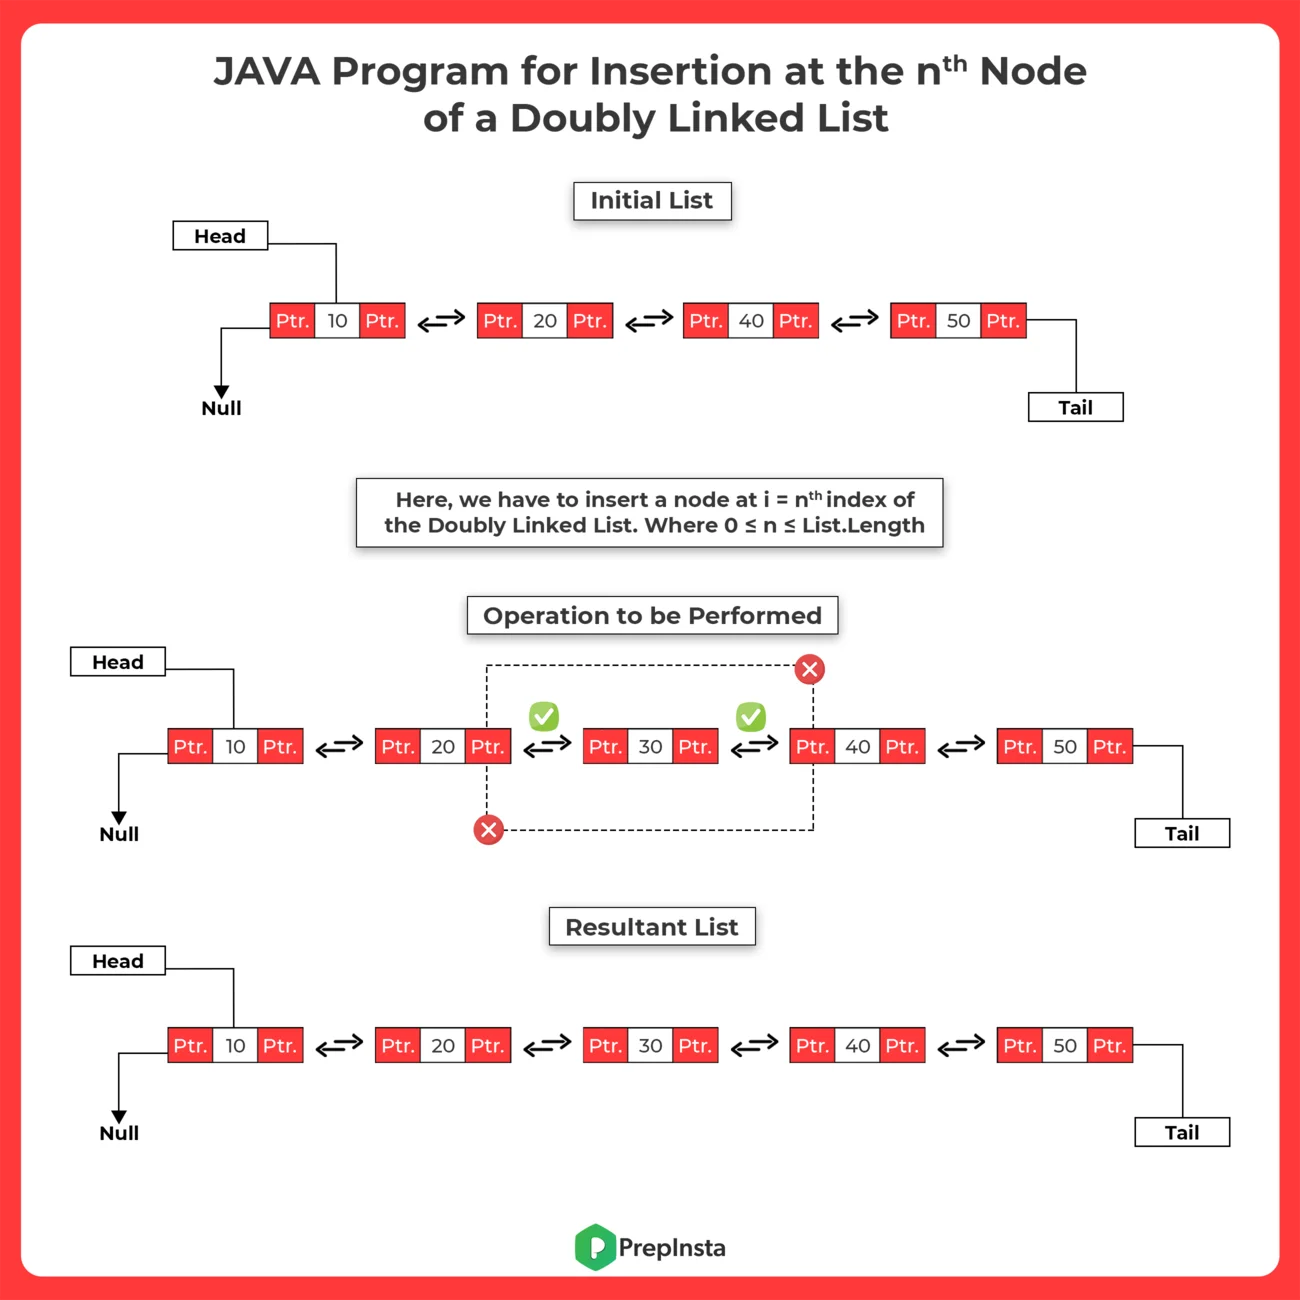 JAVA Program for Insertion at the nth node in a Doubly Linked List